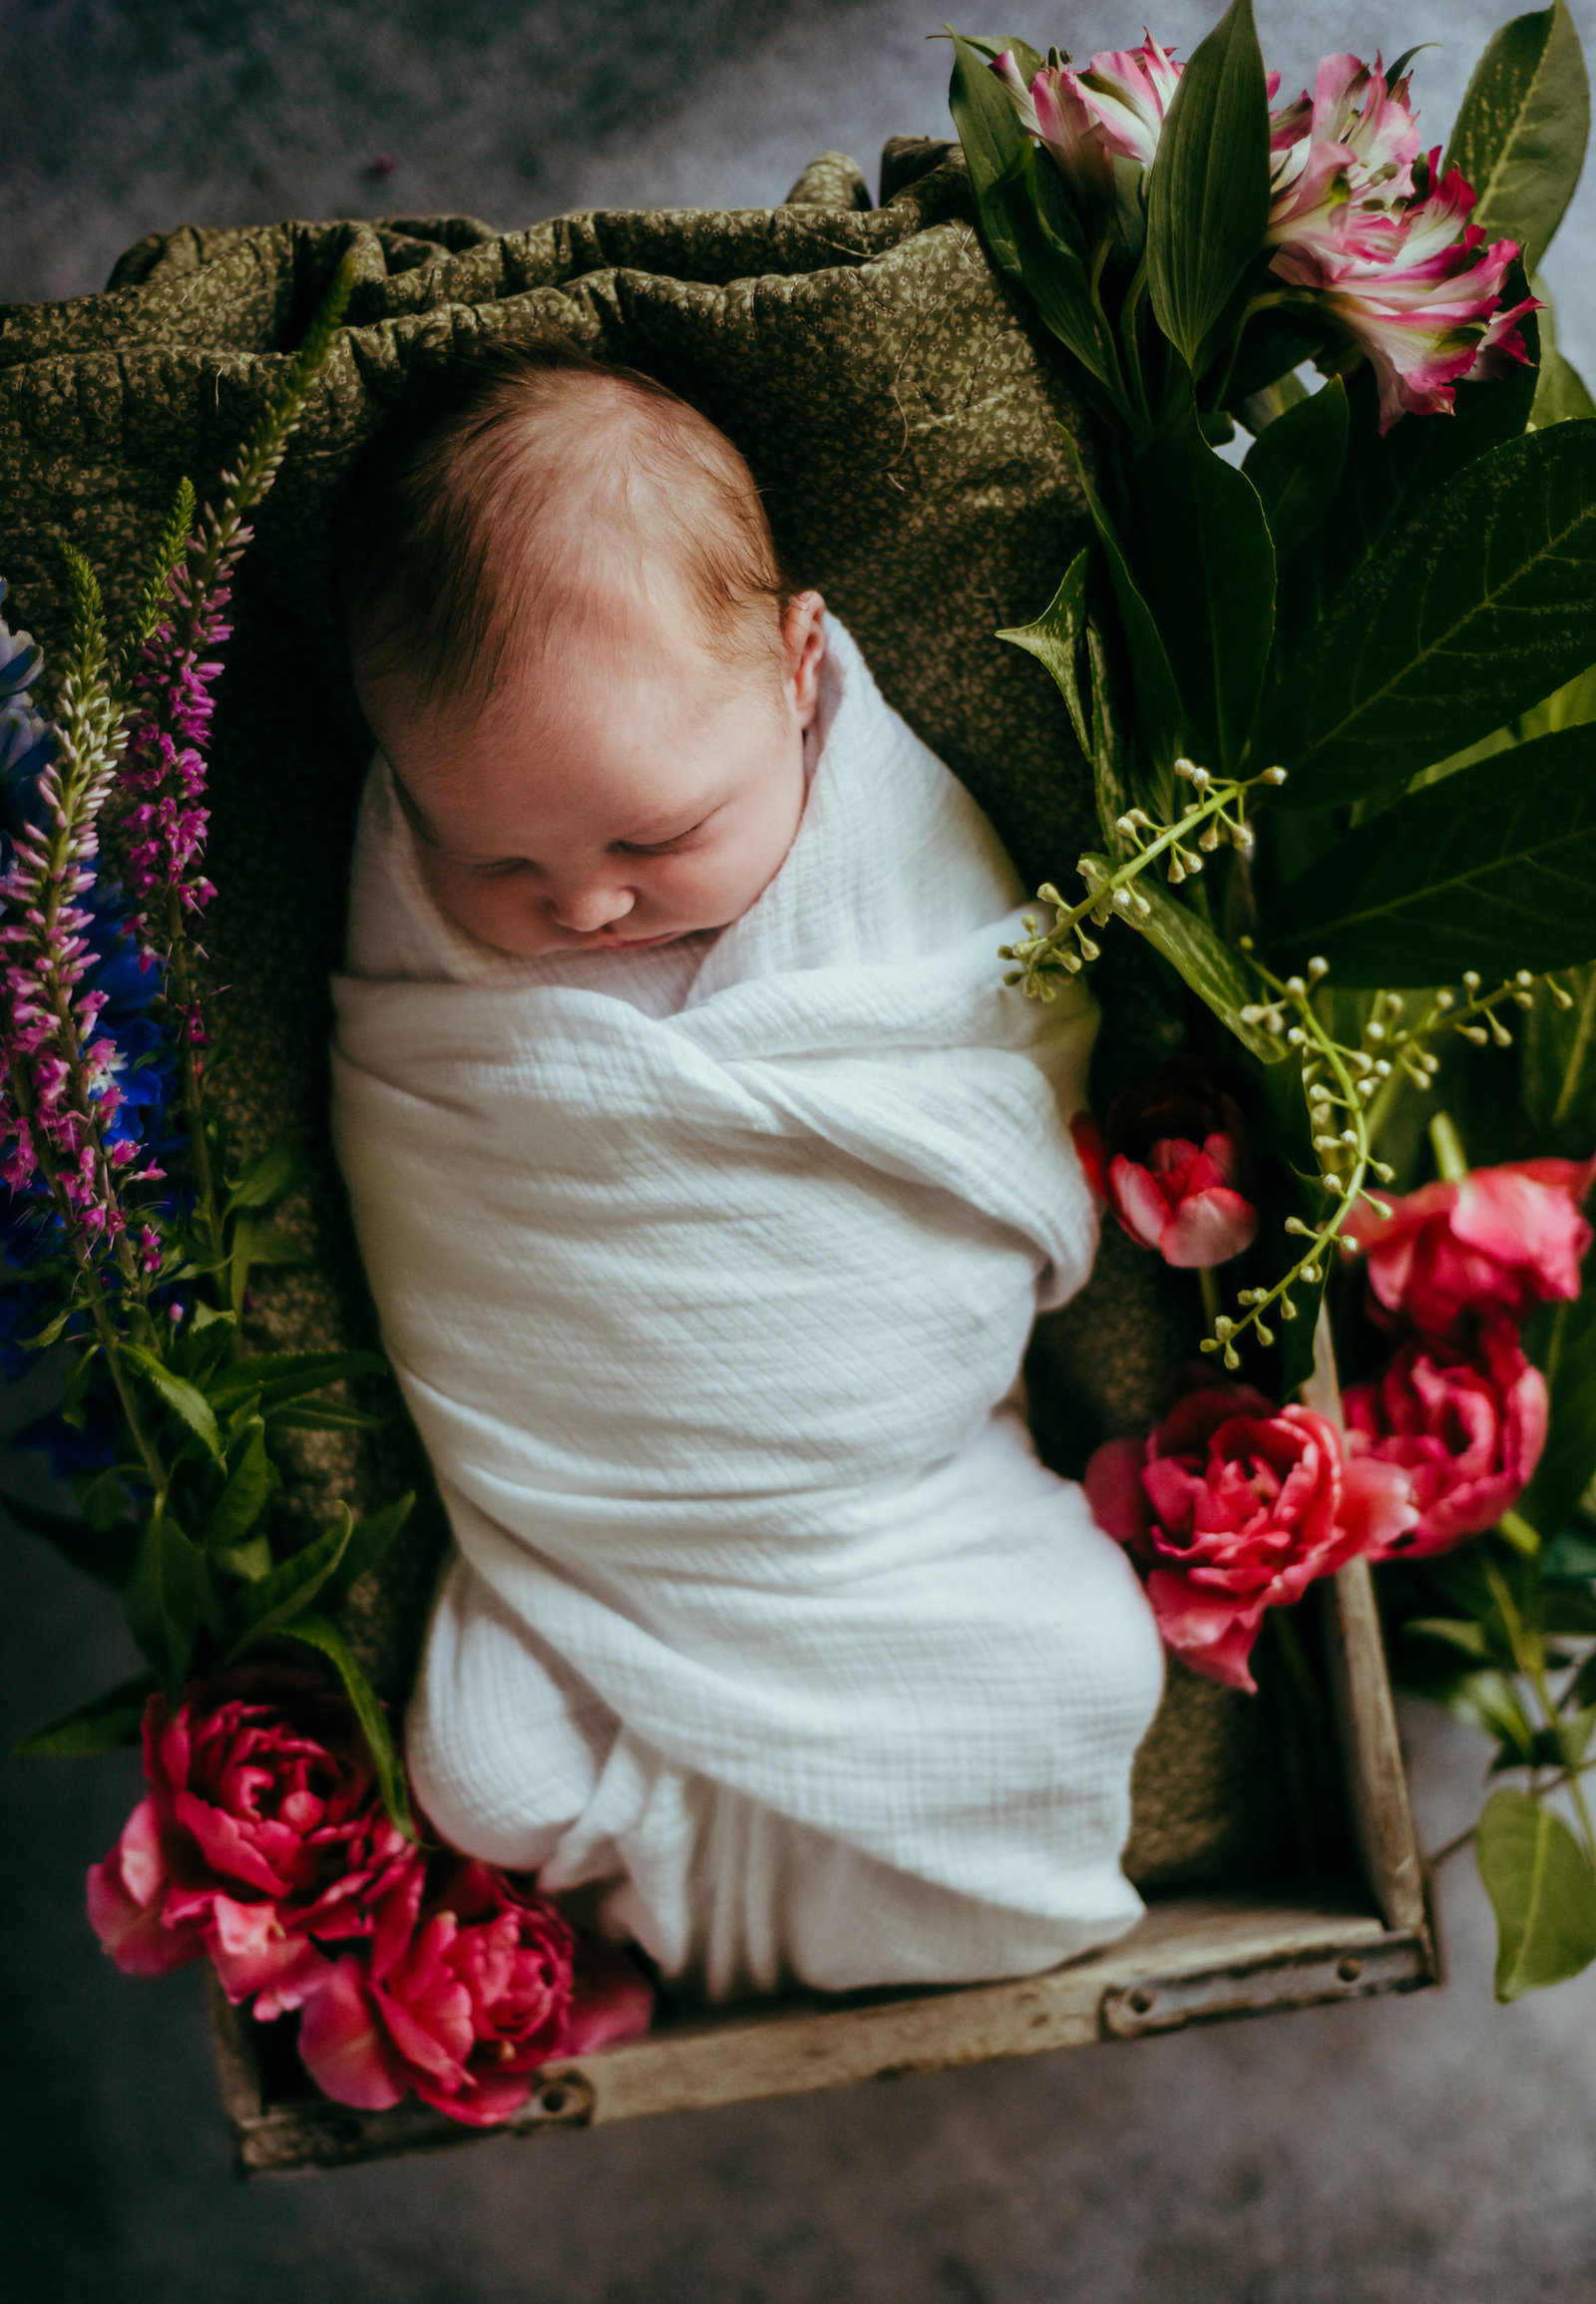 Newborn swaddled in a box surrounded by flowers